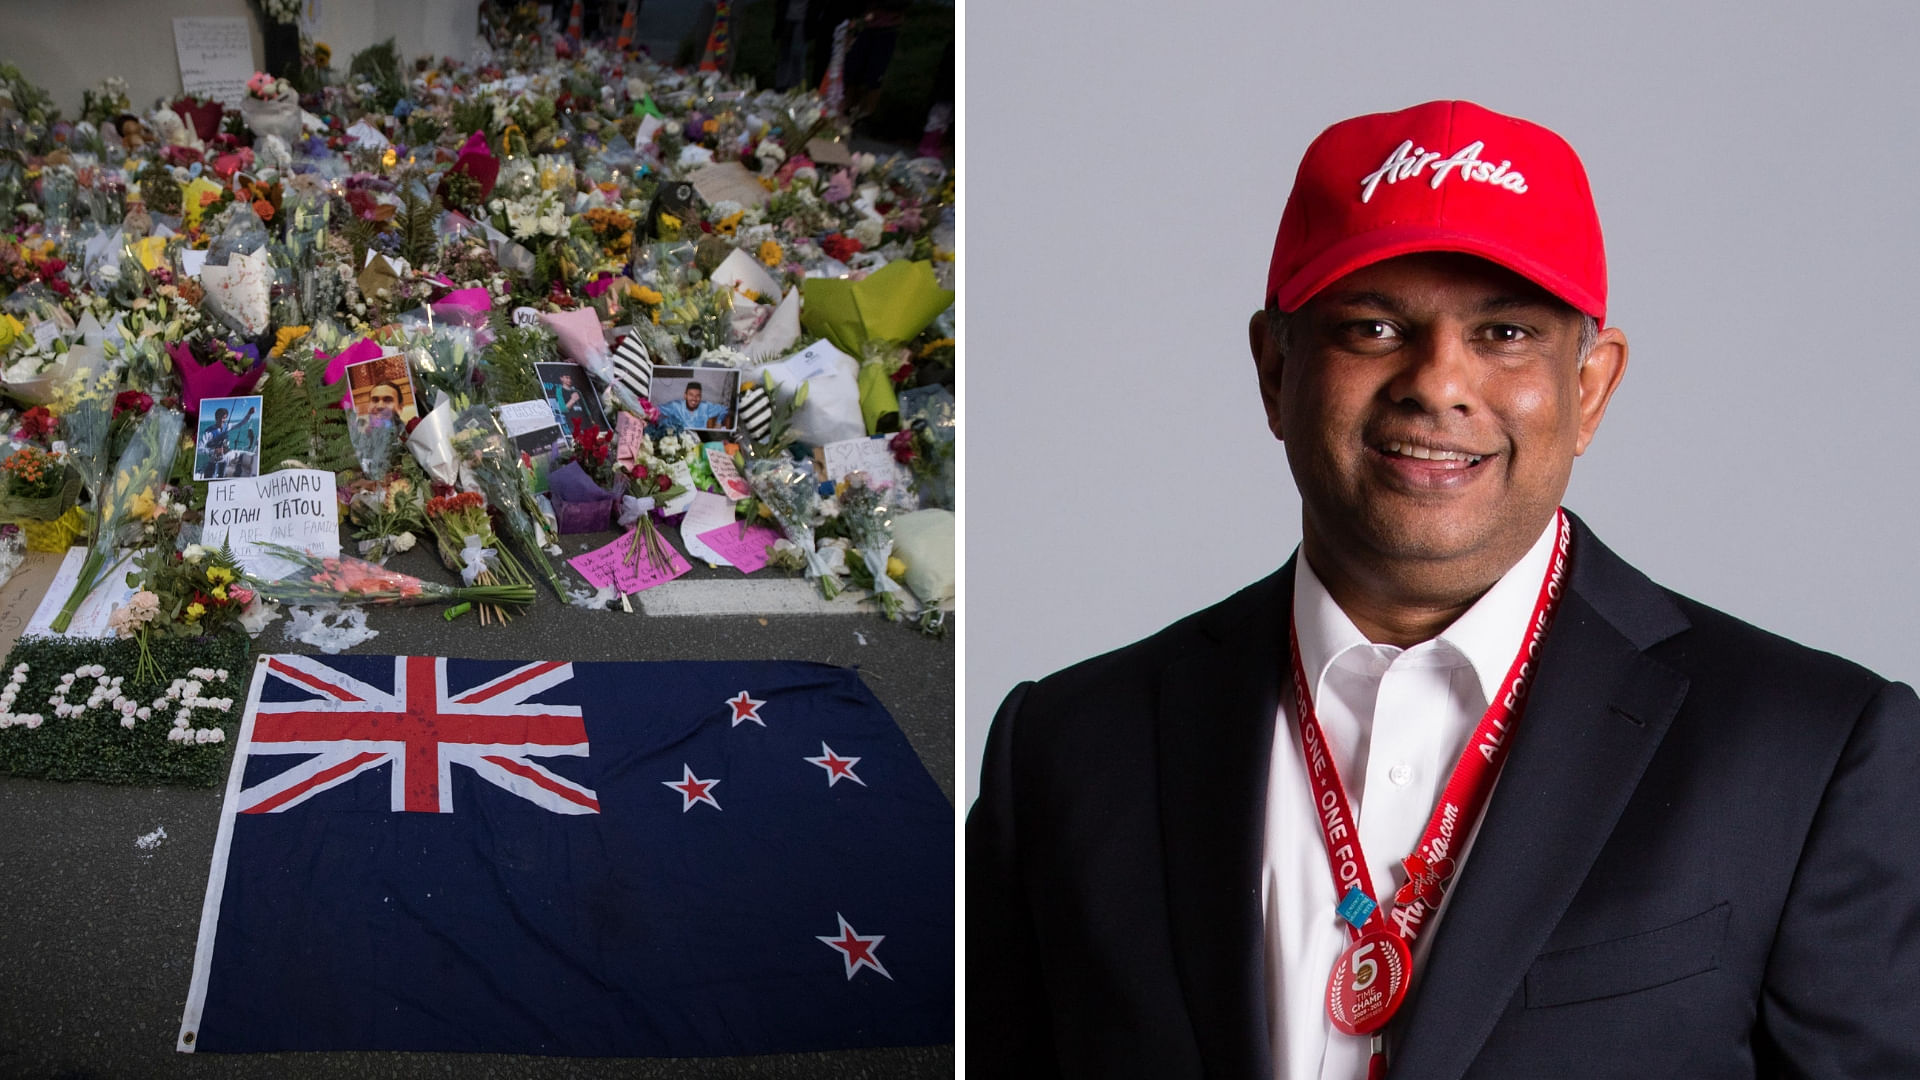 Facebook could have done more to stop the widespread live streaming of the mass shooting, AirAsia CEO Tony Fernandes said.